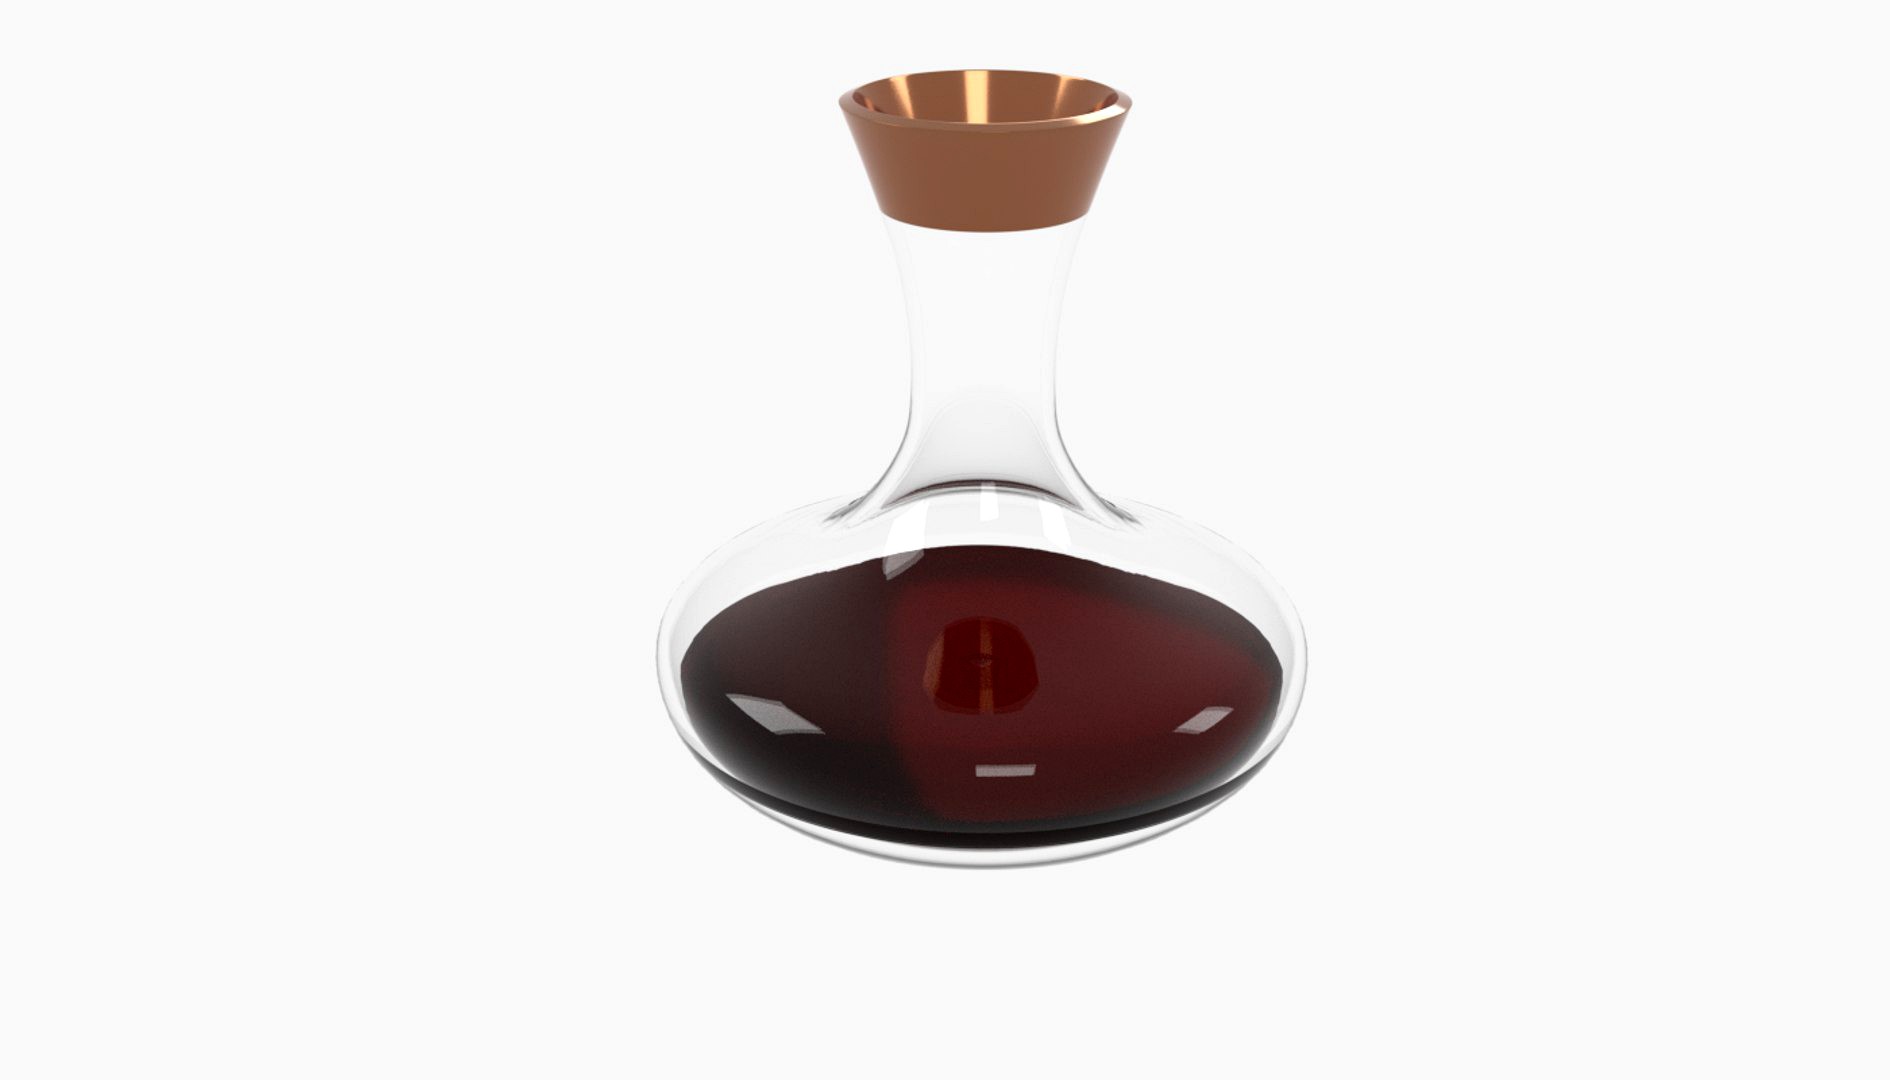 Decanter with wine